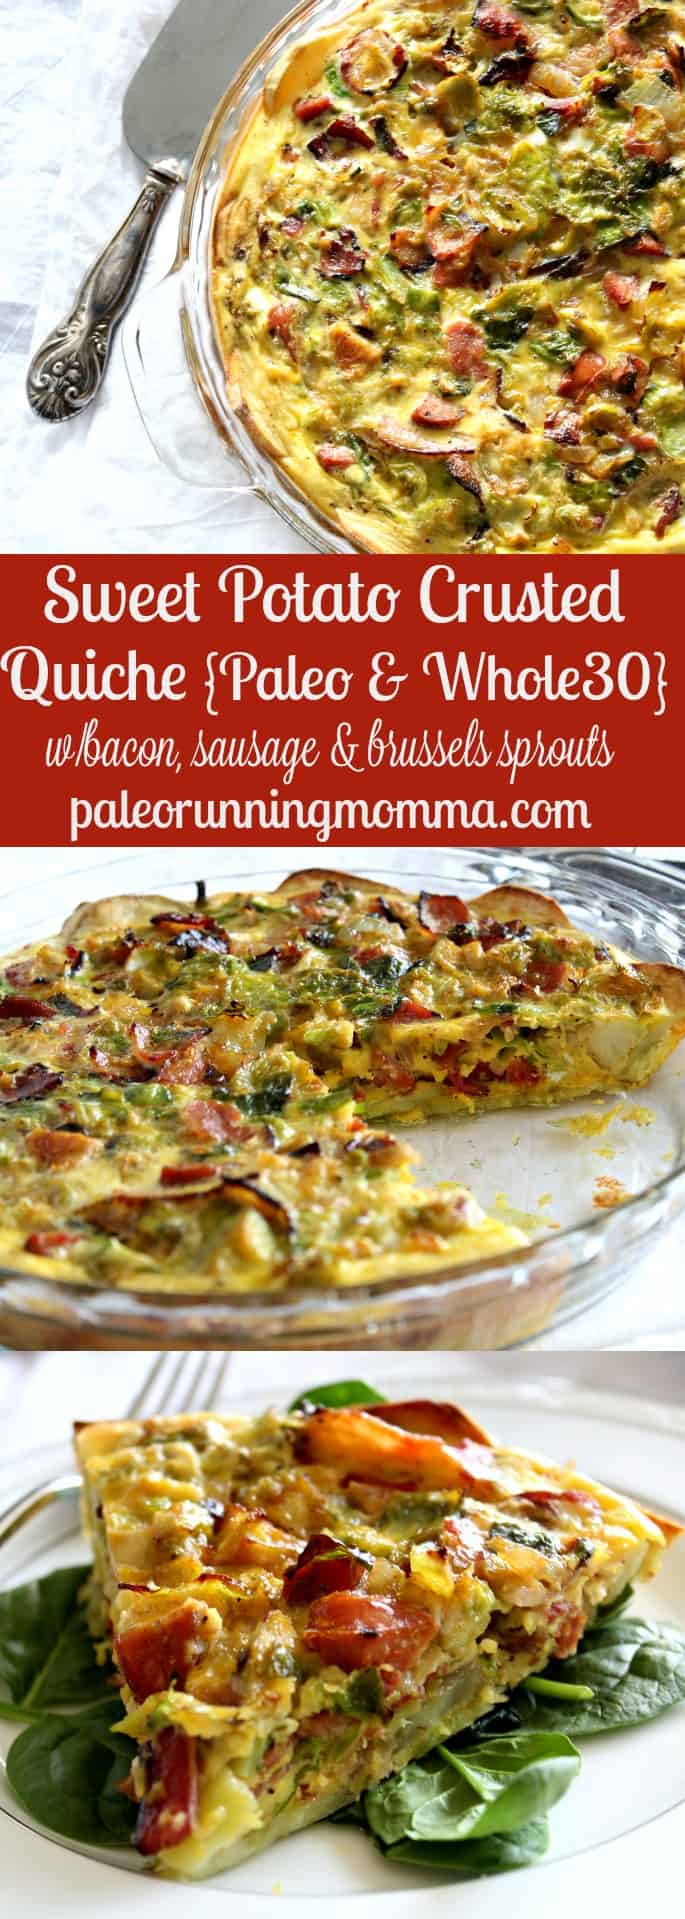 Sweet Potato Crusted Quiche - paleo & Whole30 - with bacon, sausage, and brussels sprouts